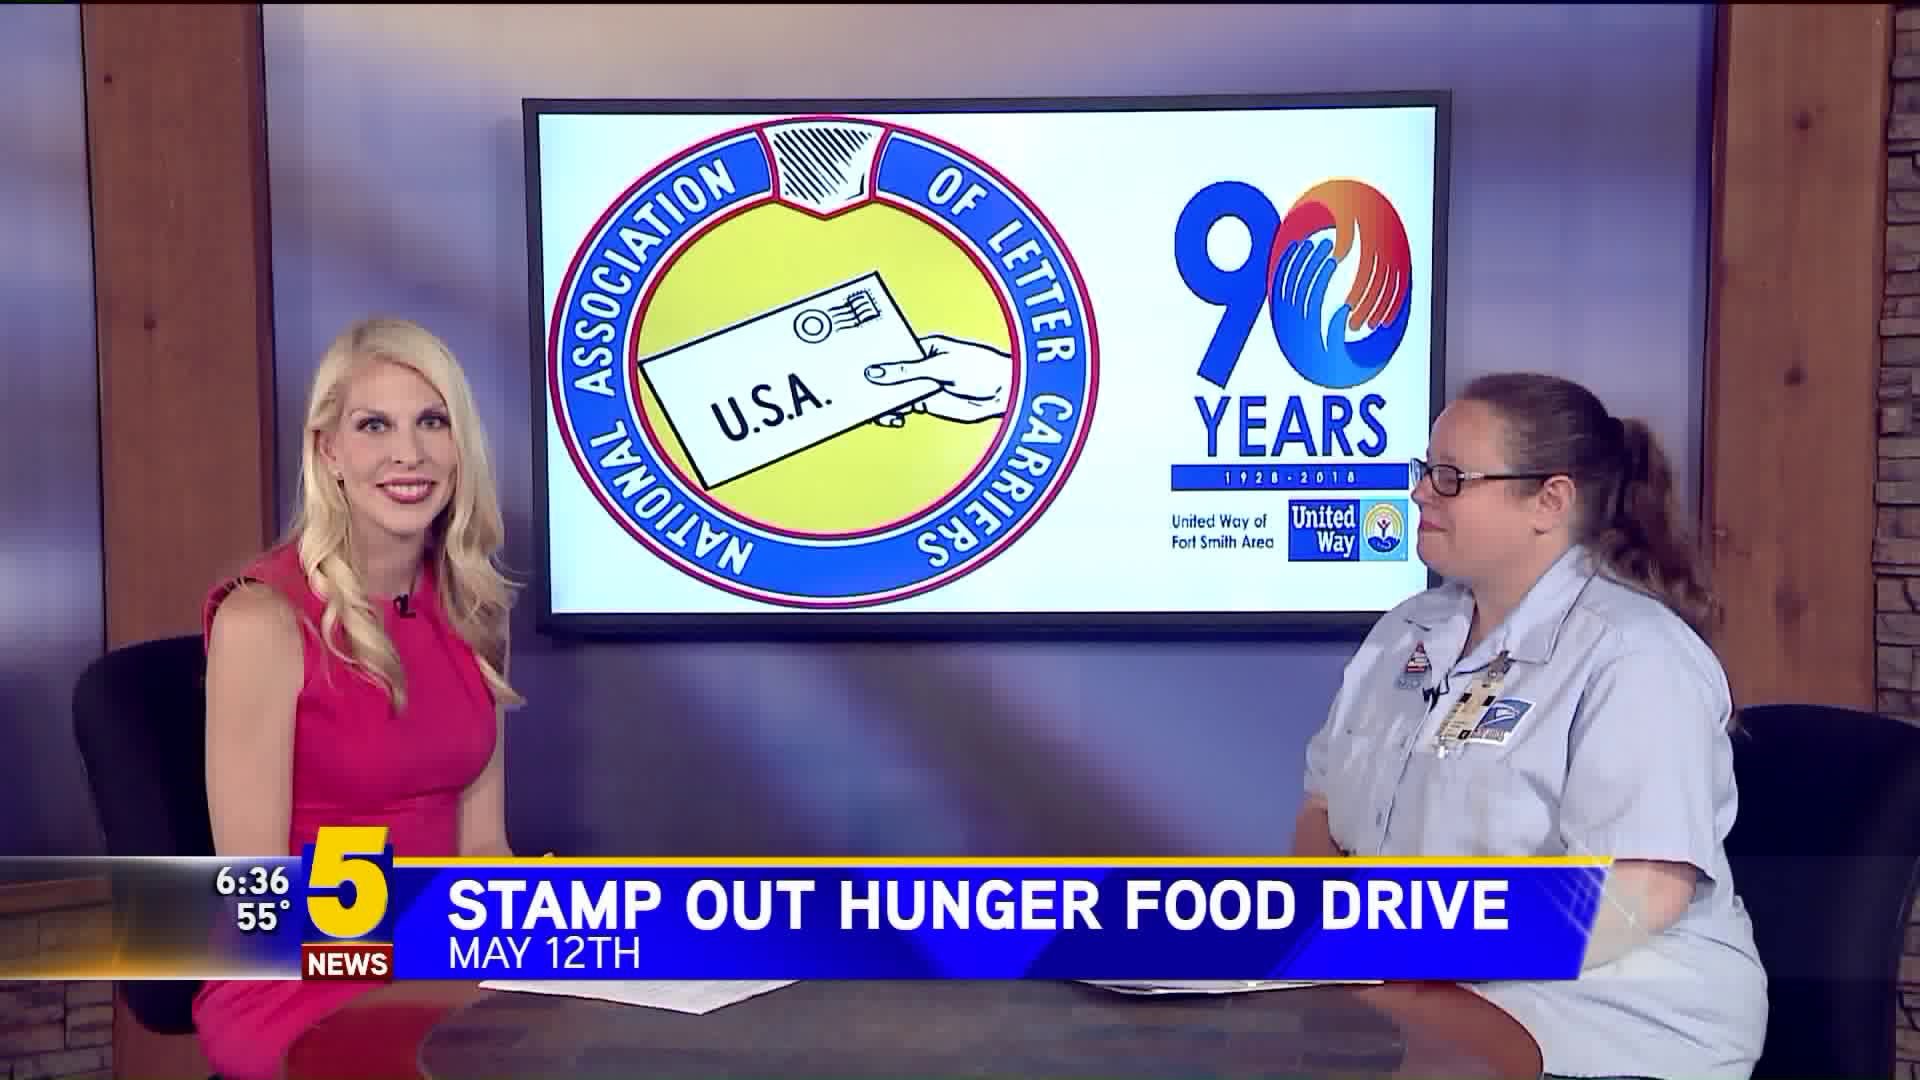 STAMP OUT HUNGER